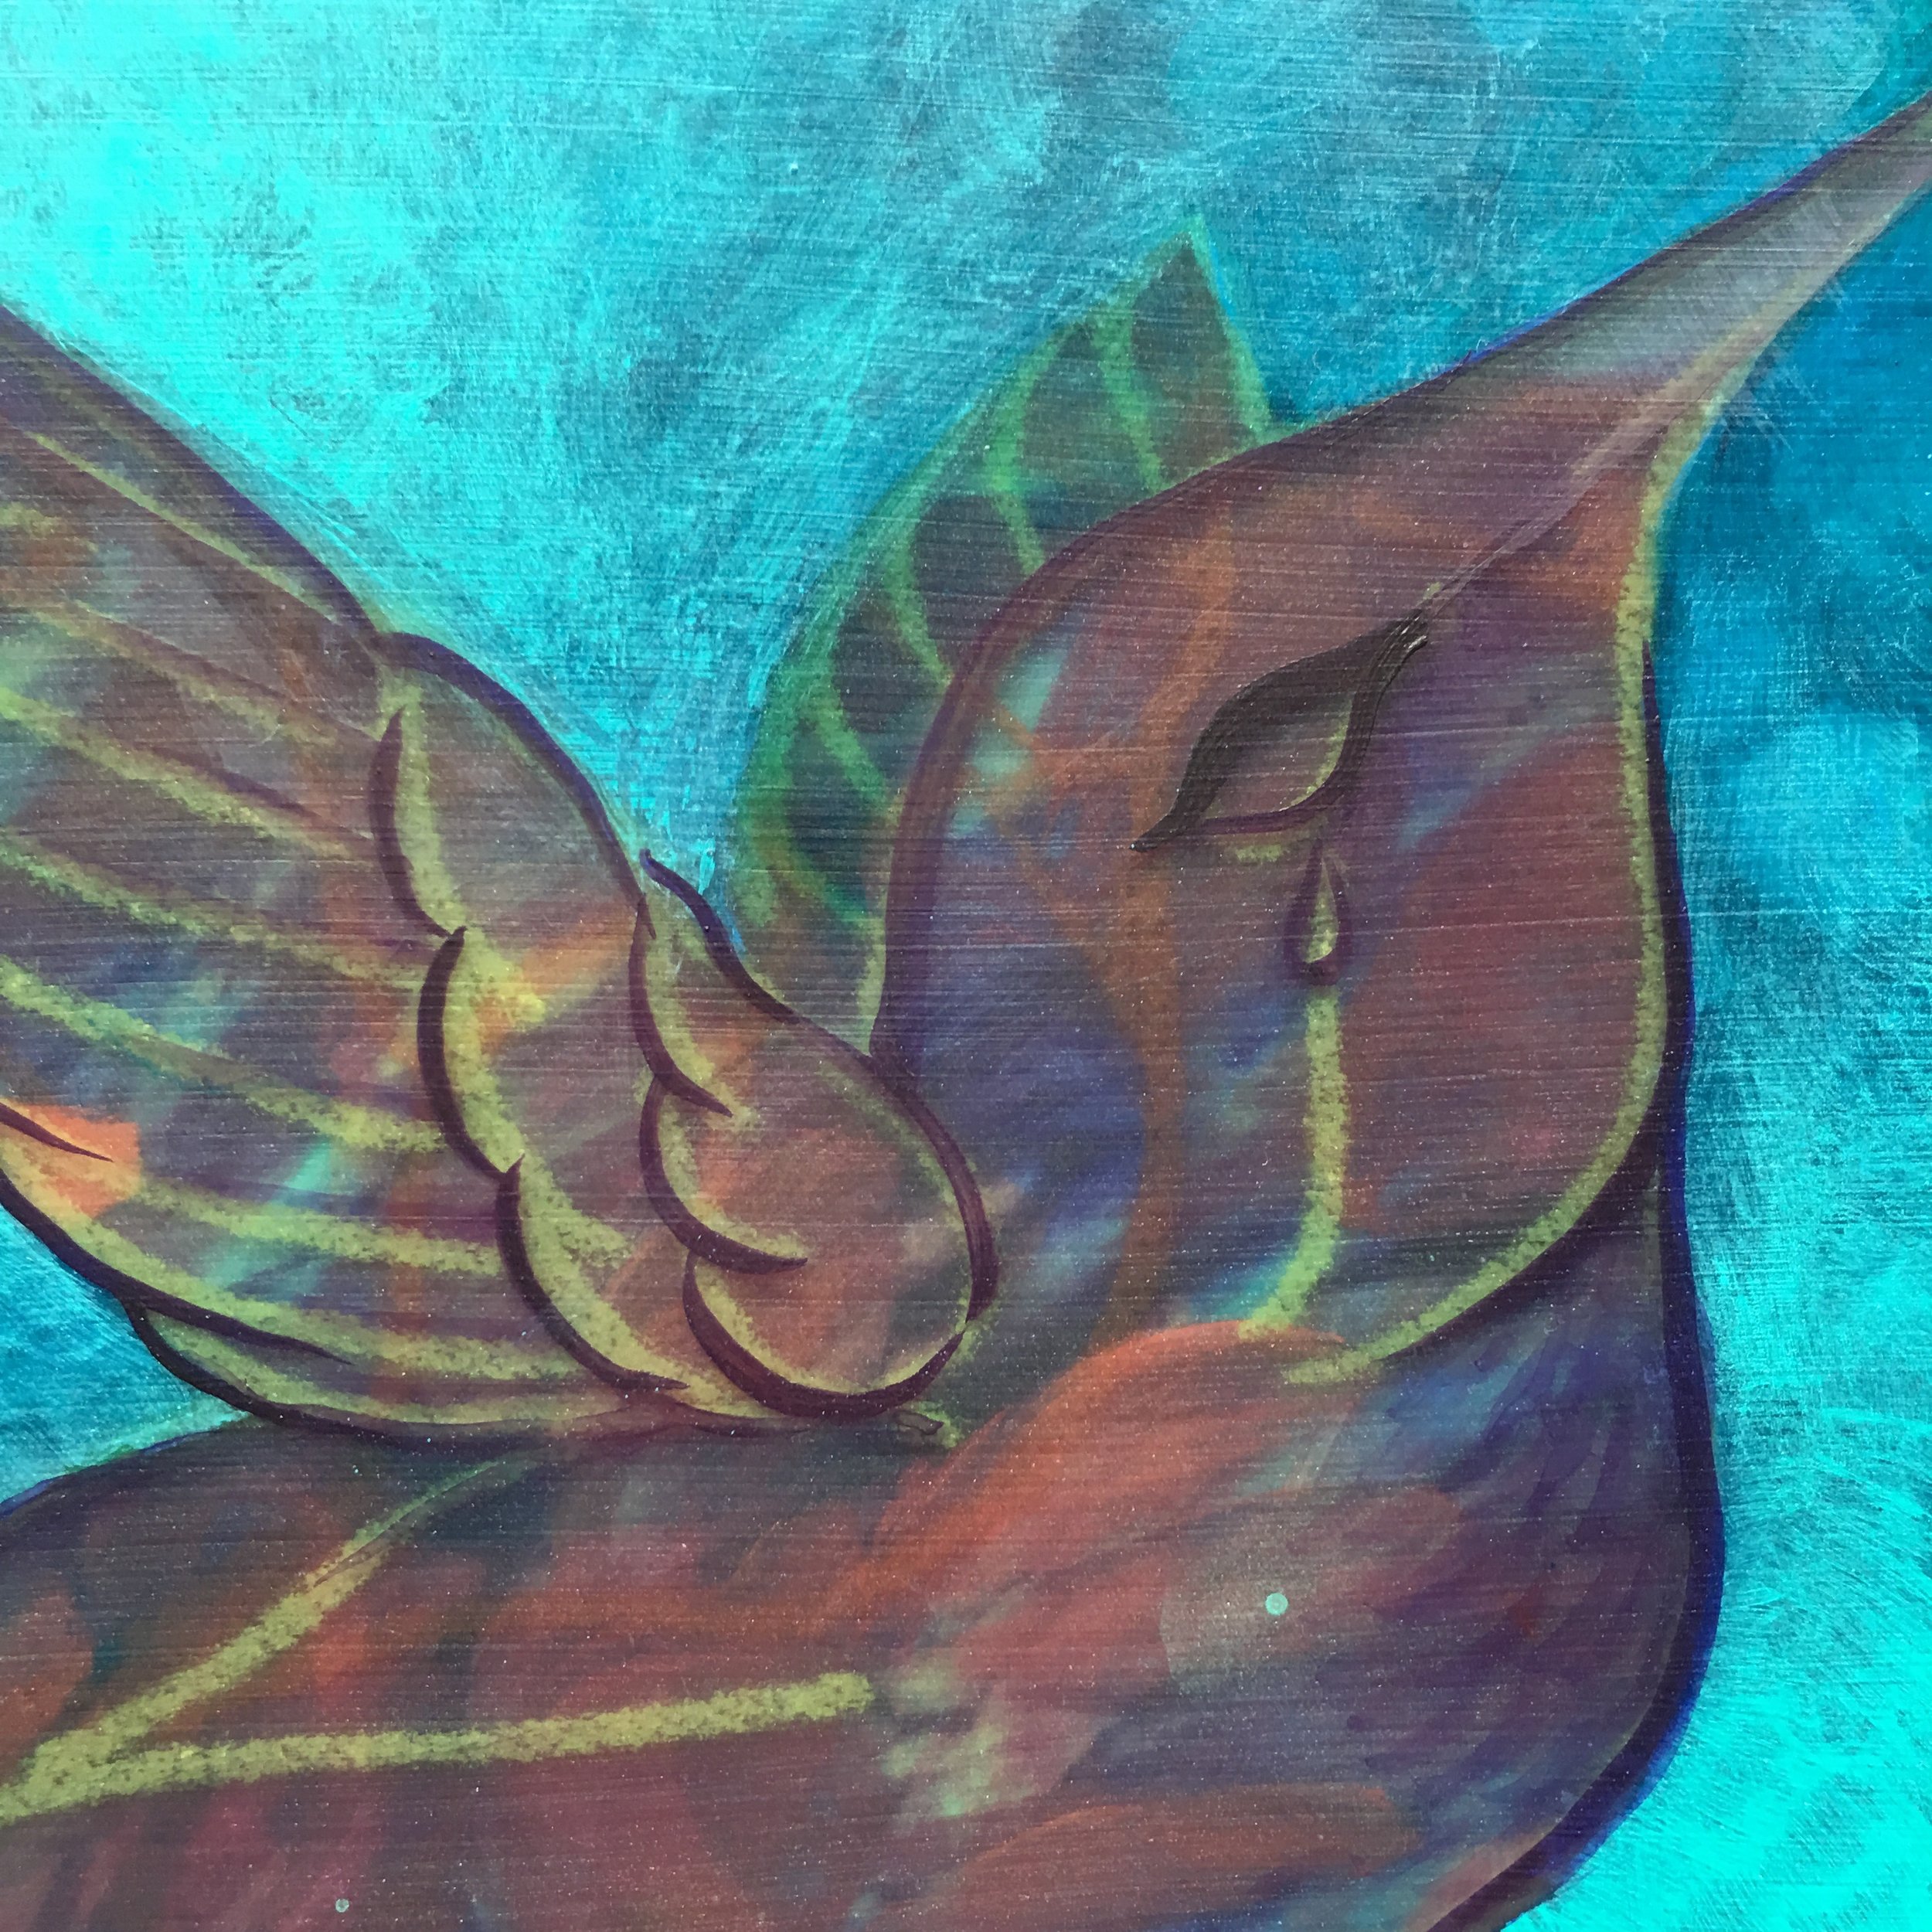 Detail of upper bird. Adding linework over the transferred image. 